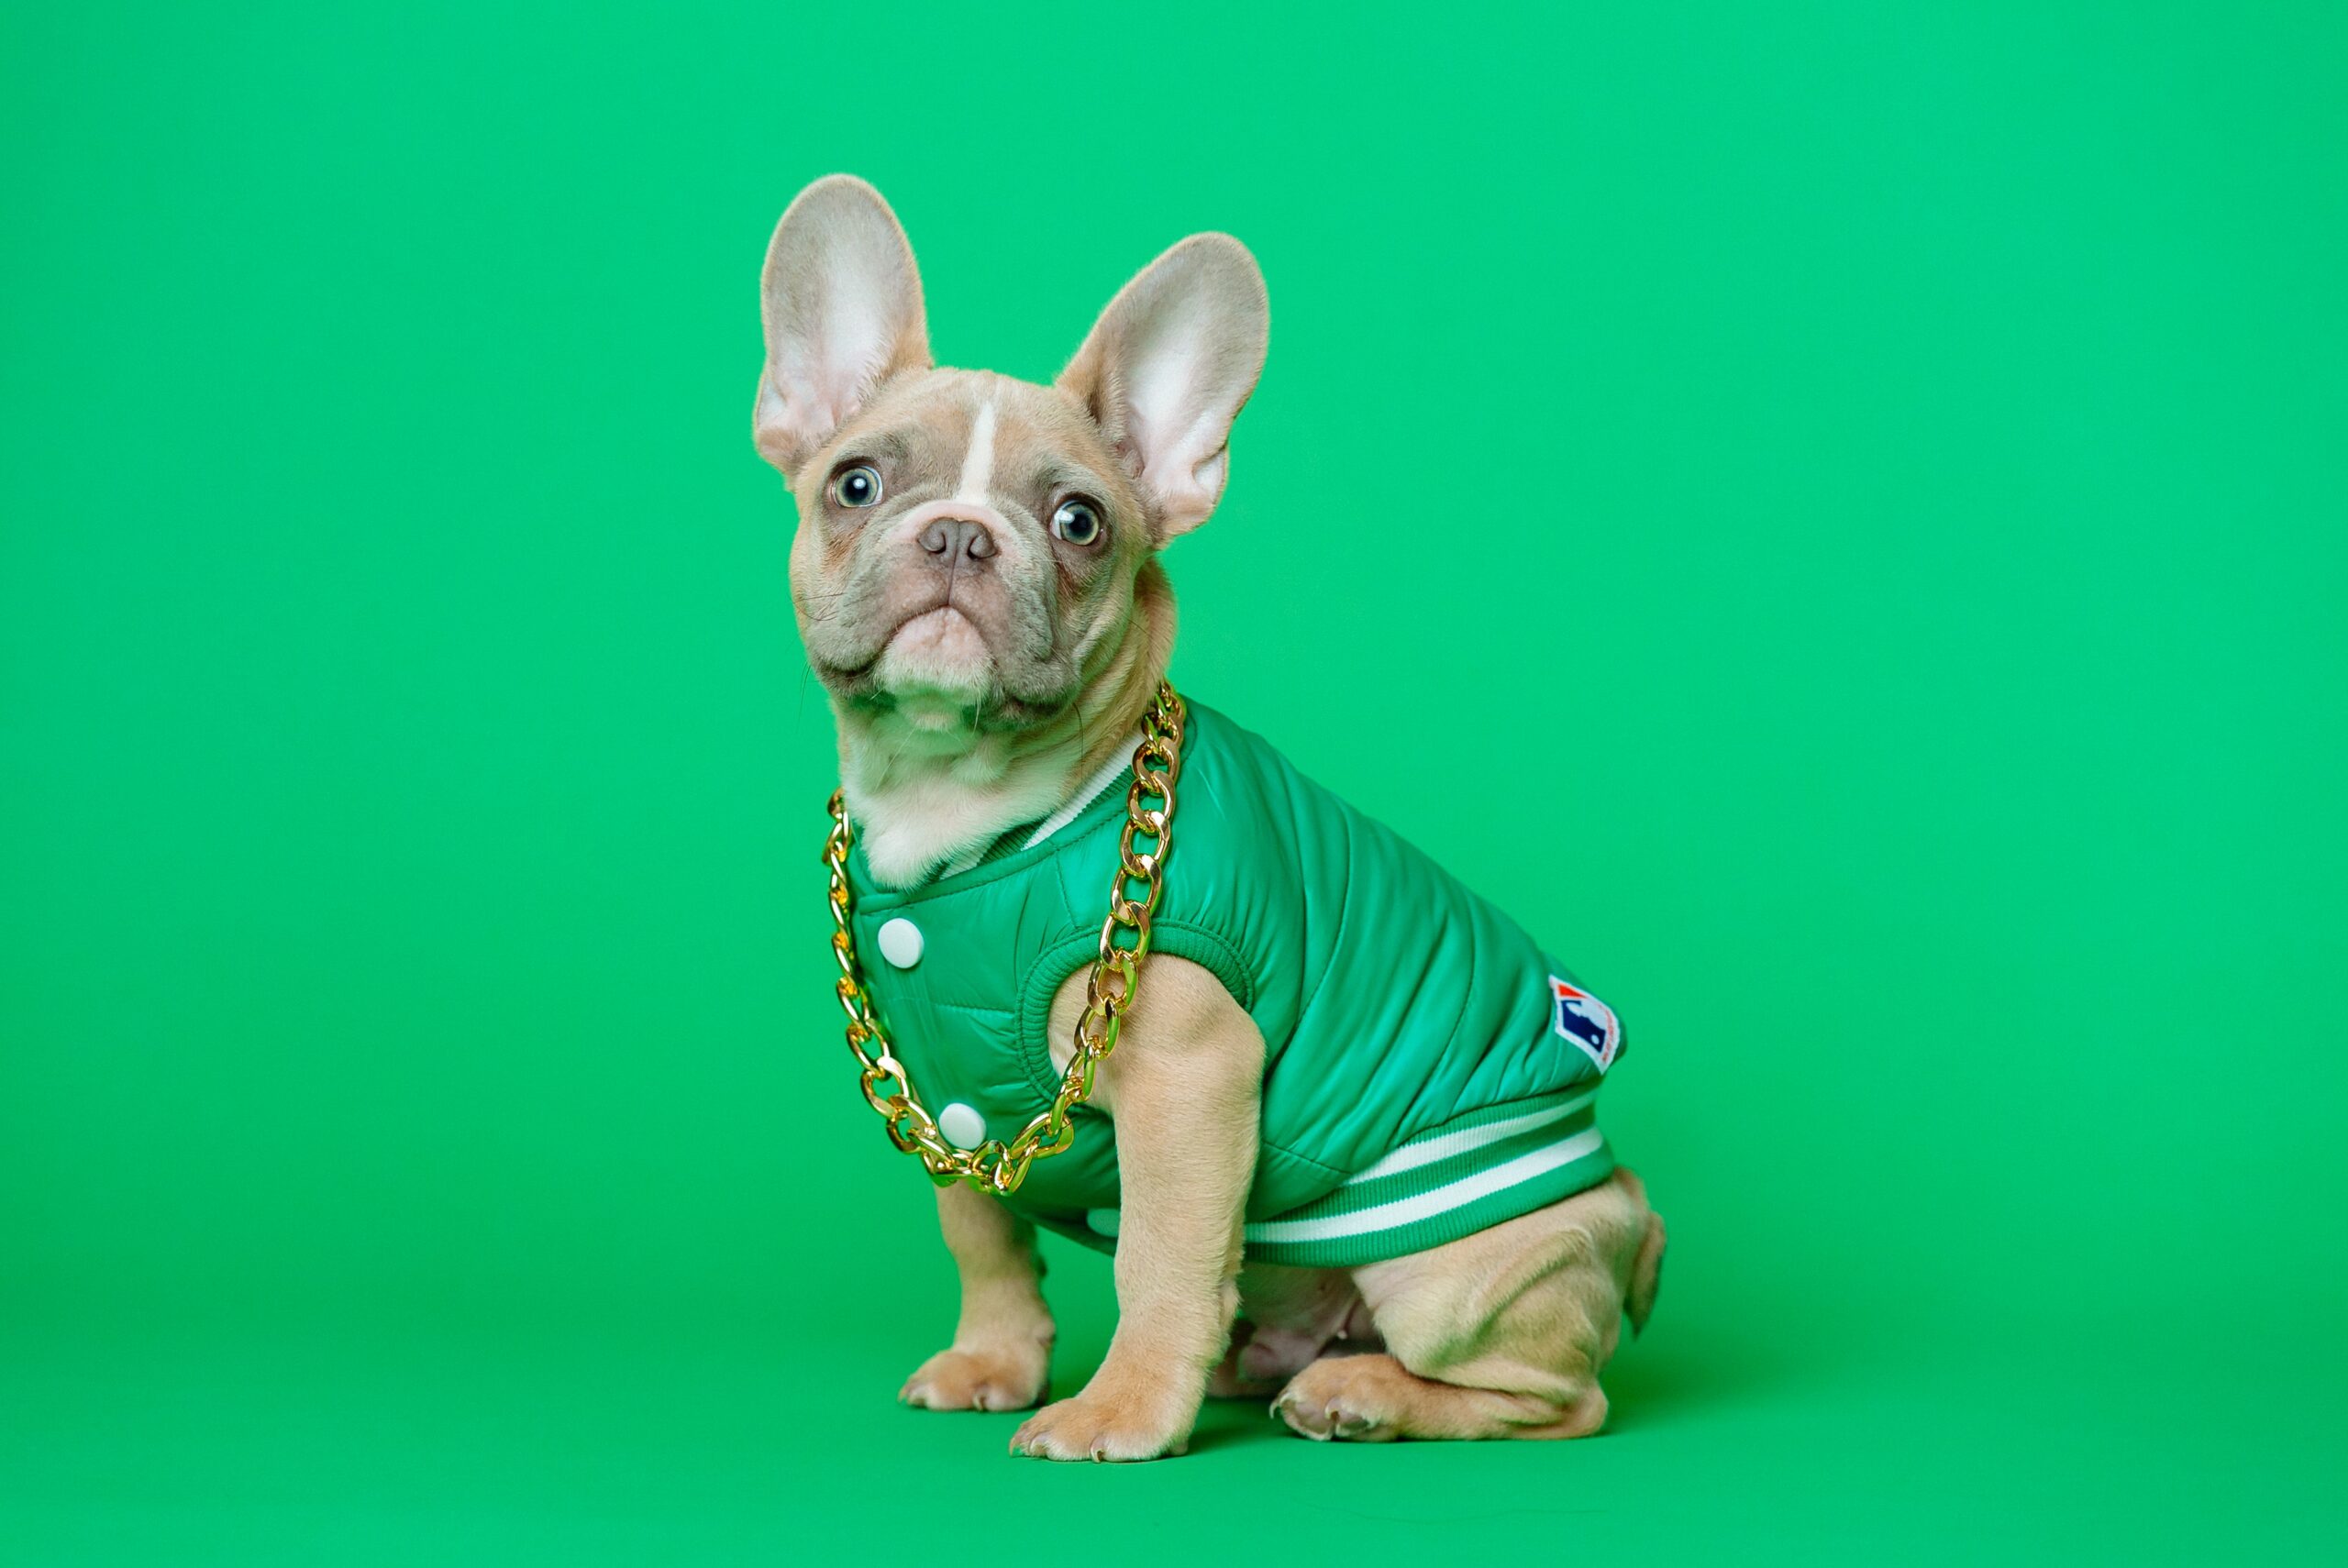 A french bull dog wearing a green jacket and gold chain in front of a green backdrop.